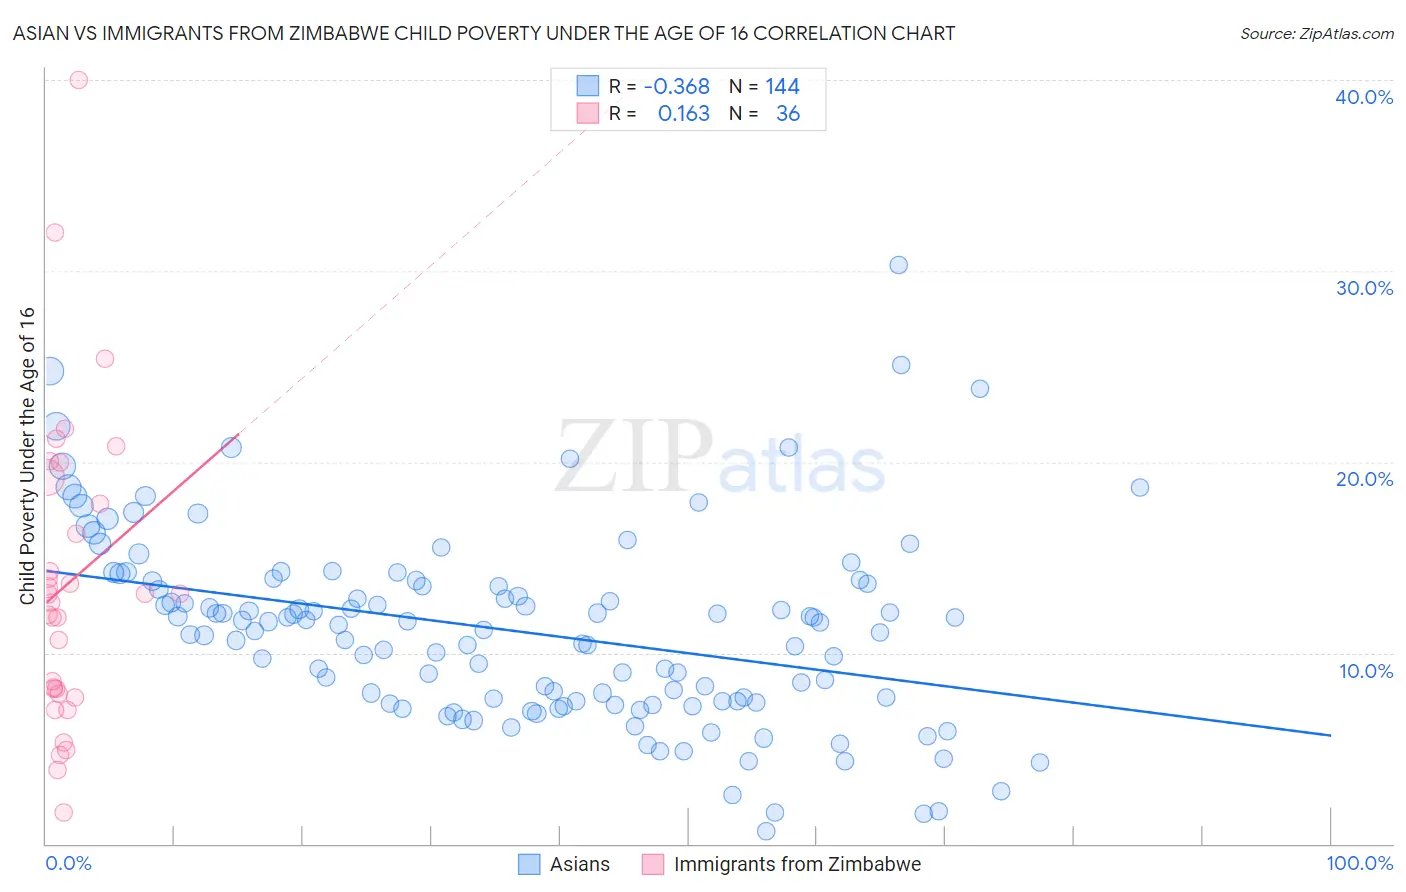 Asian vs Immigrants from Zimbabwe Child Poverty Under the Age of 16